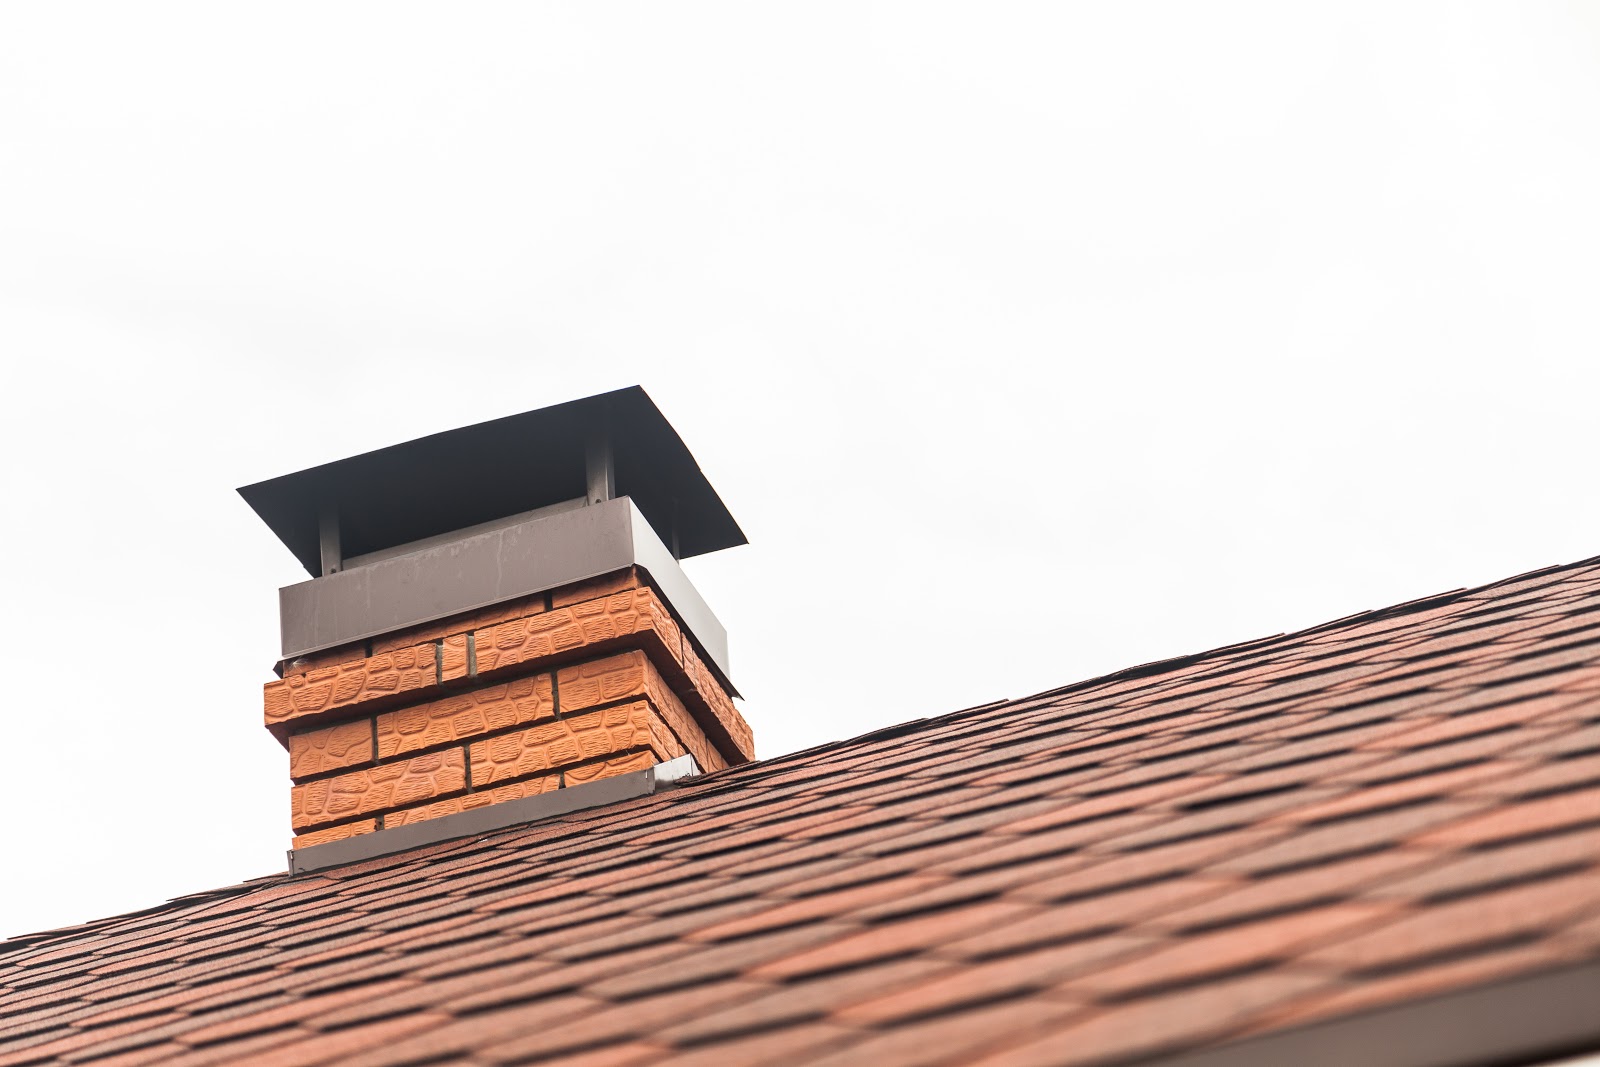 image of residential home exterior roof and chimney